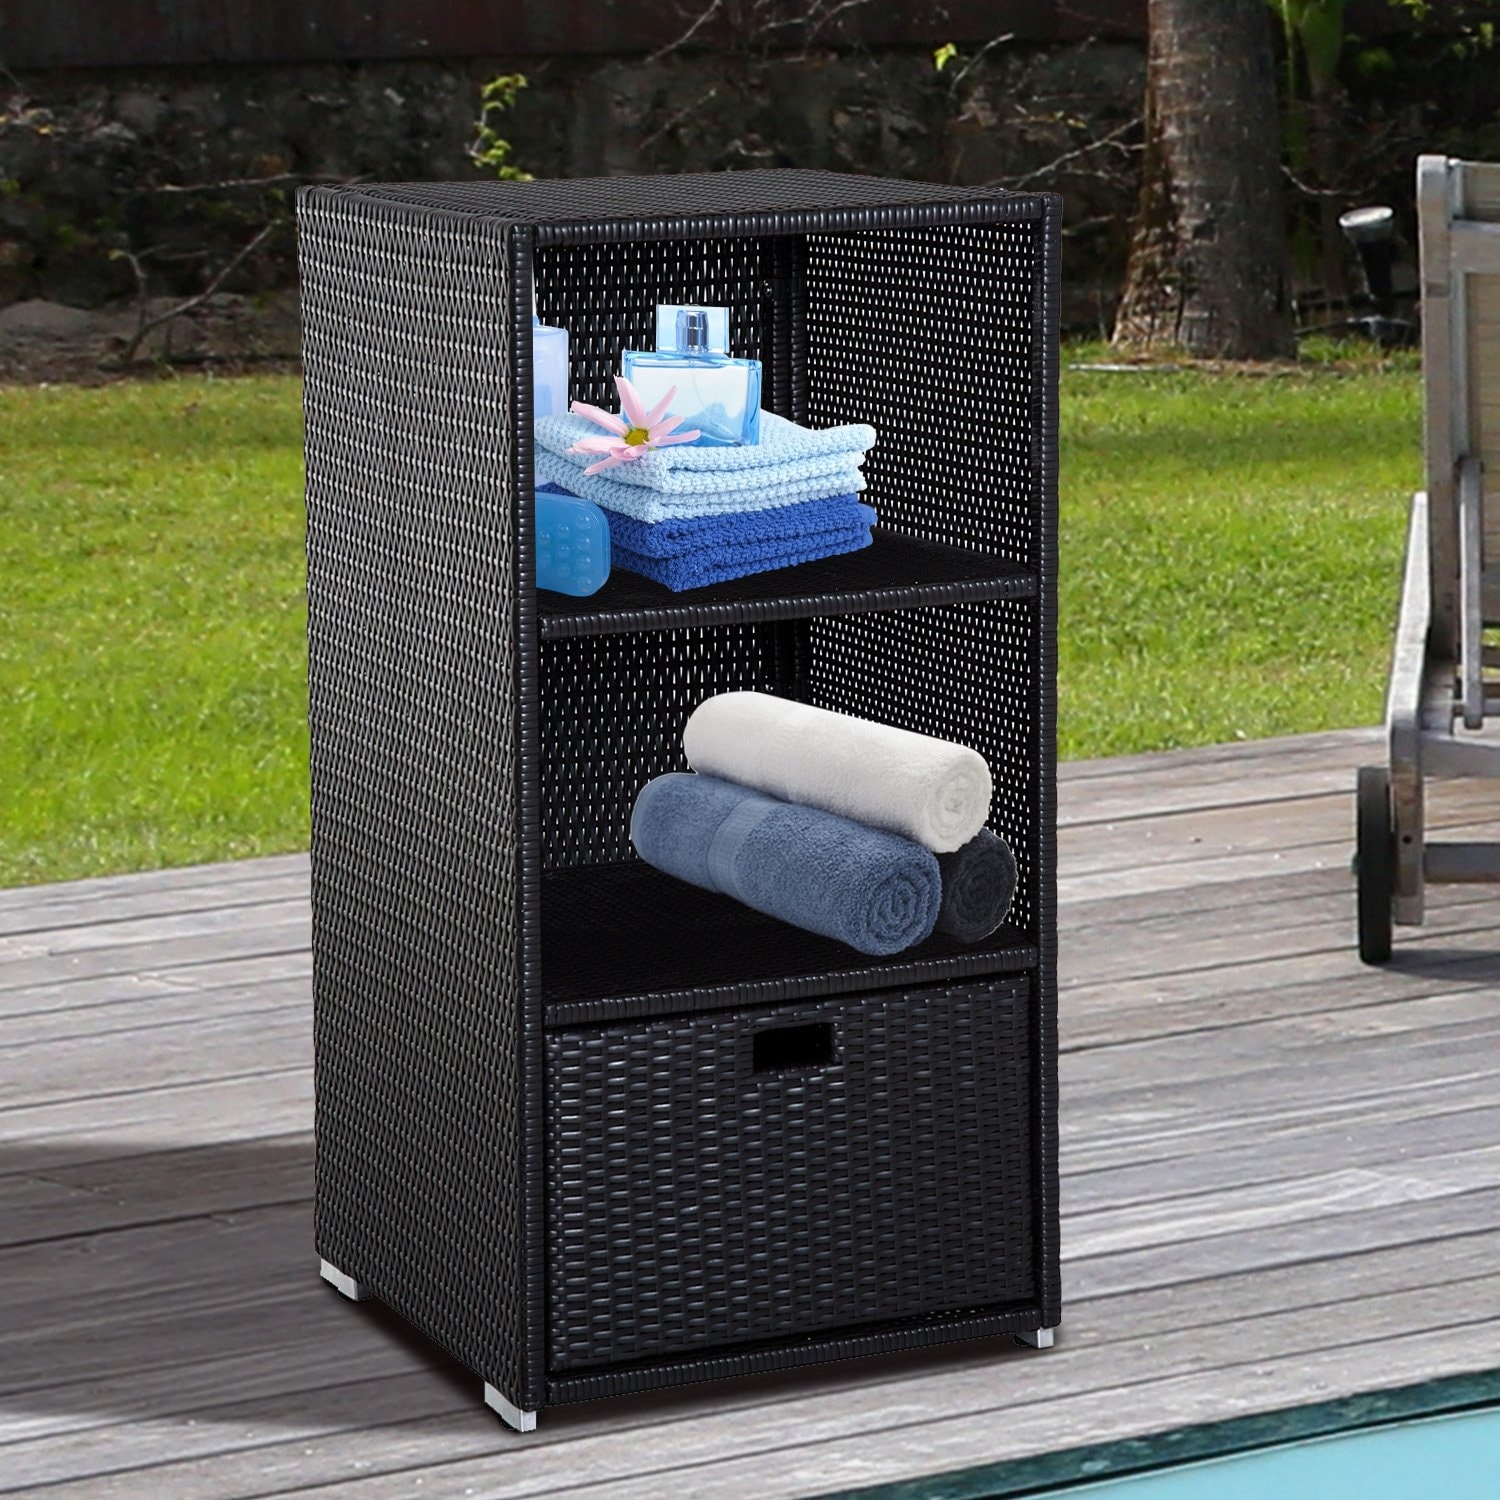 Outsunny Outdoor Towel Rack & Pool Toy Cabinet / Hot Tub Accessory